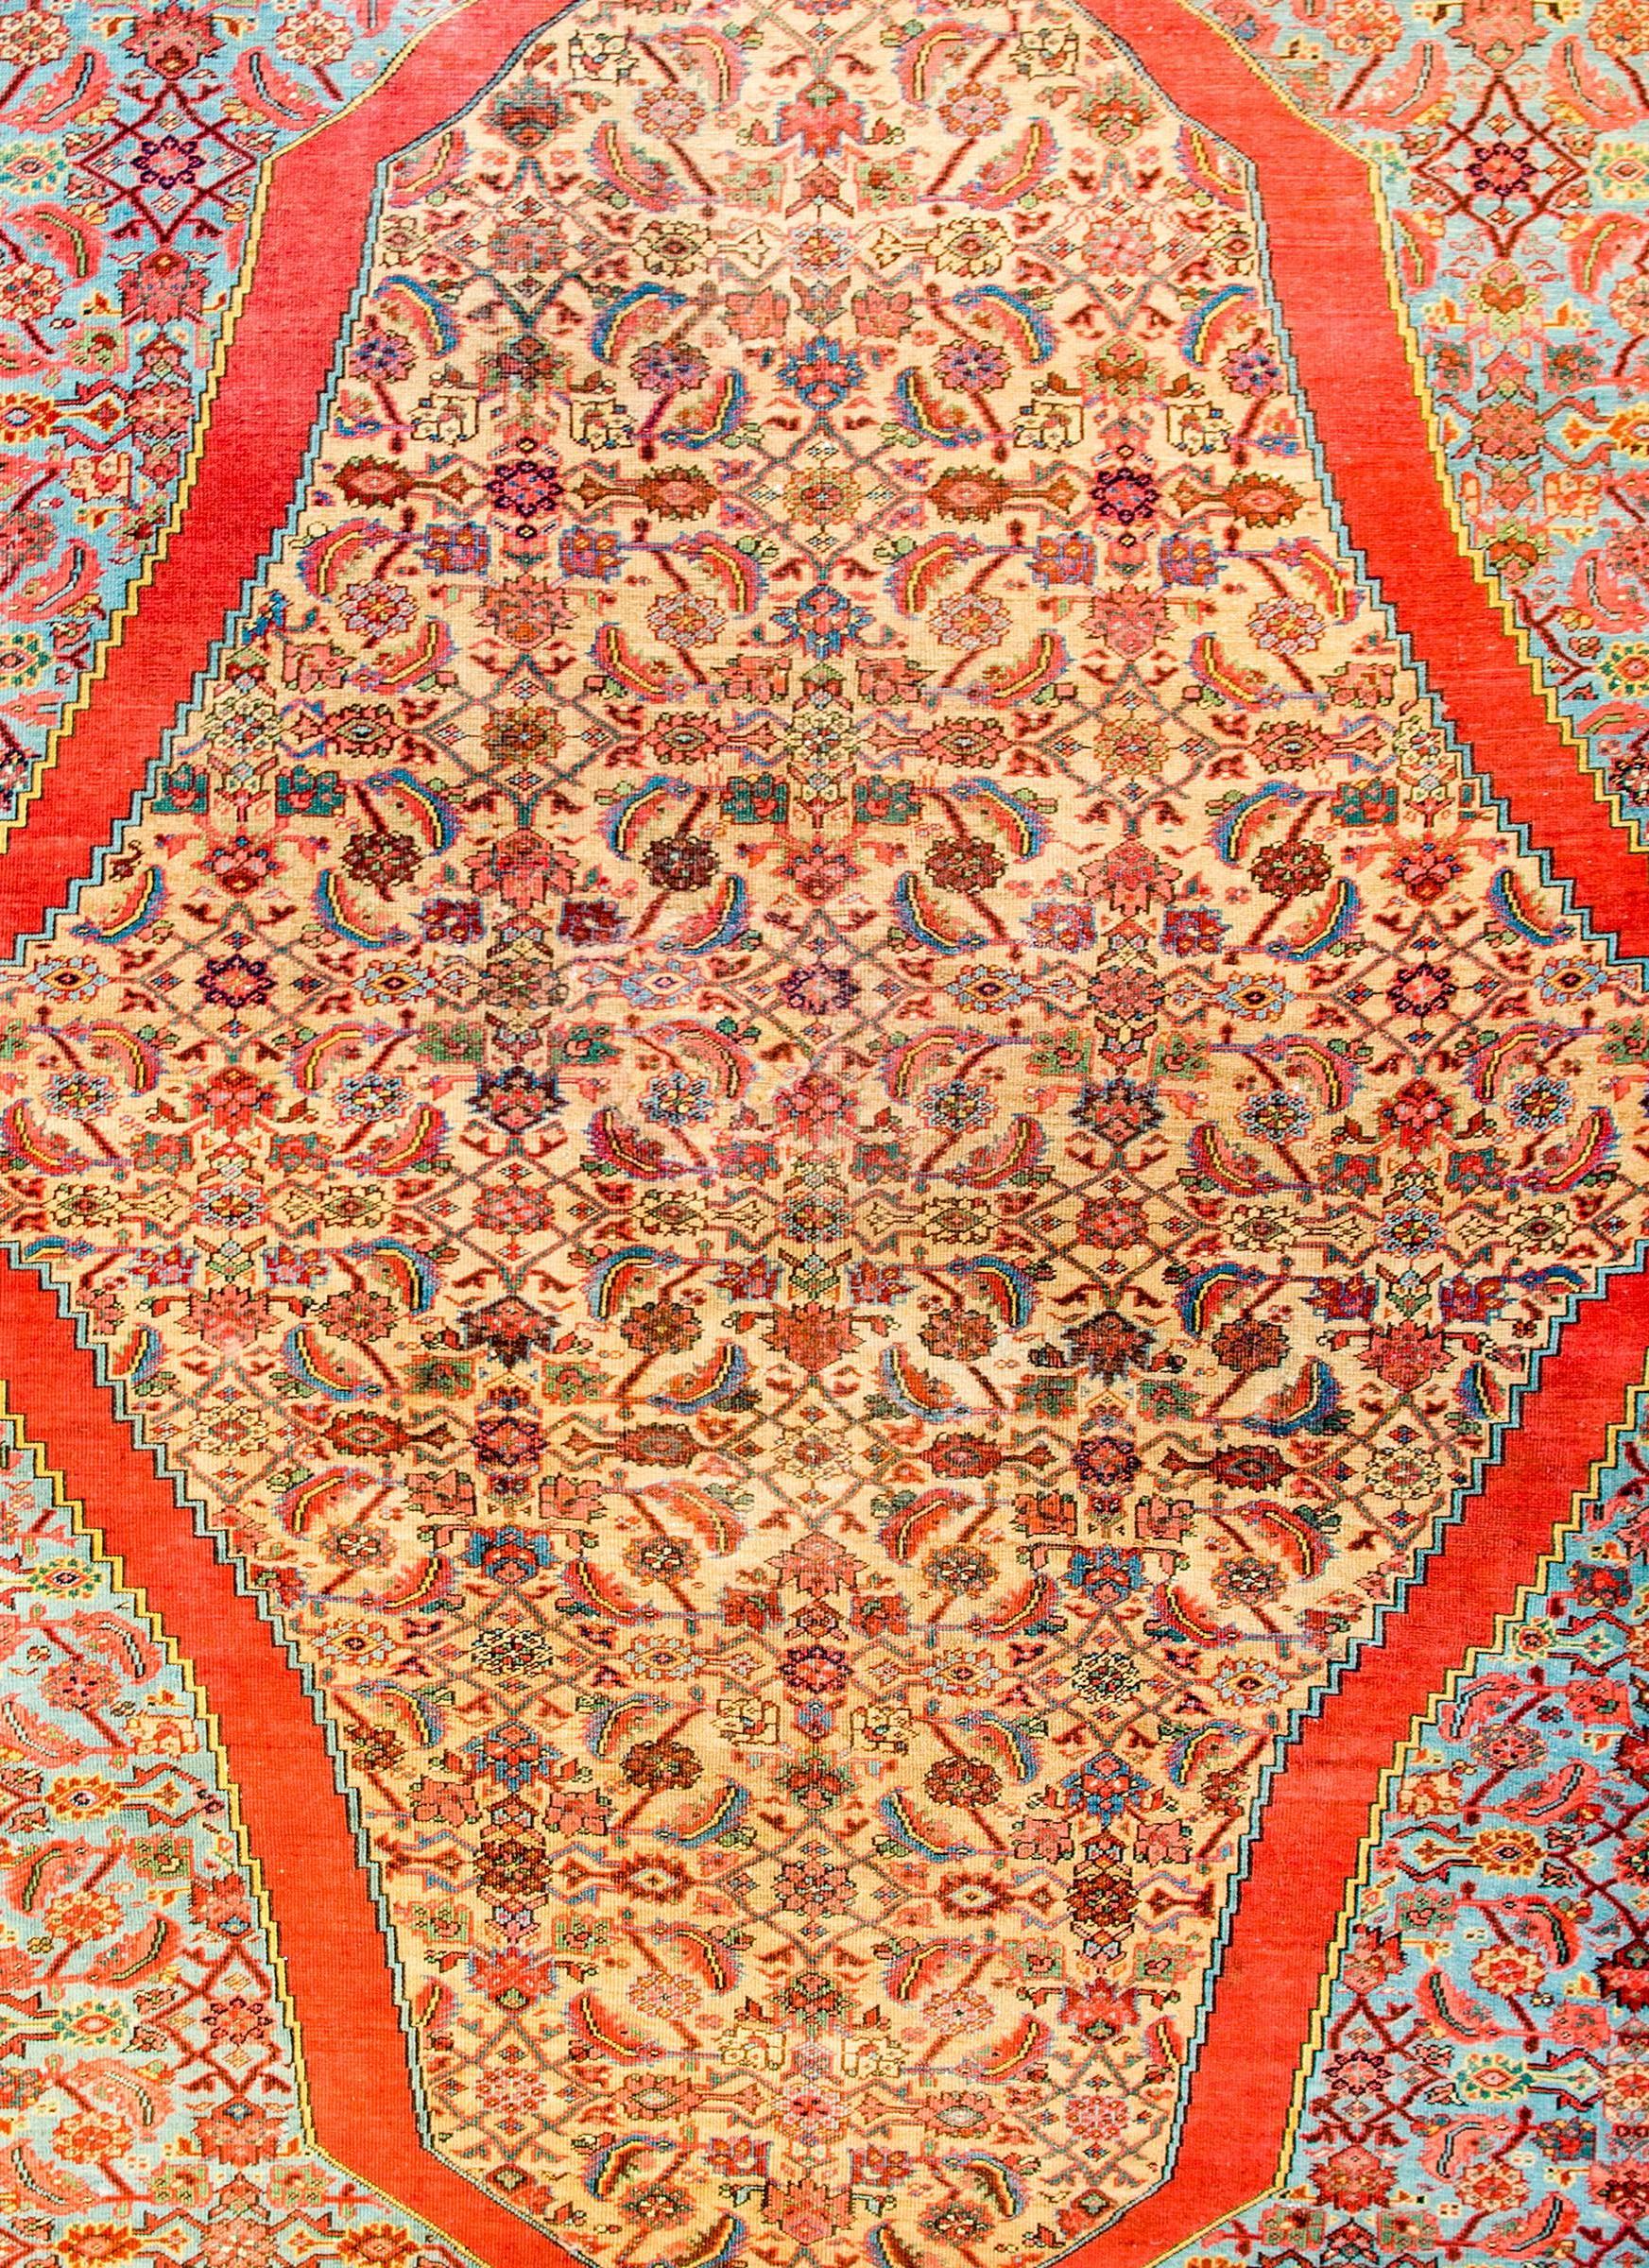 An unbelievable early 20th century Persian Bakshaish rug with an incredibly all-over trellis and floral pattern woven in crimson, pink, green, gold and dark indigo on a natural undyed wool background. The trellis floats in a large, wide crimson